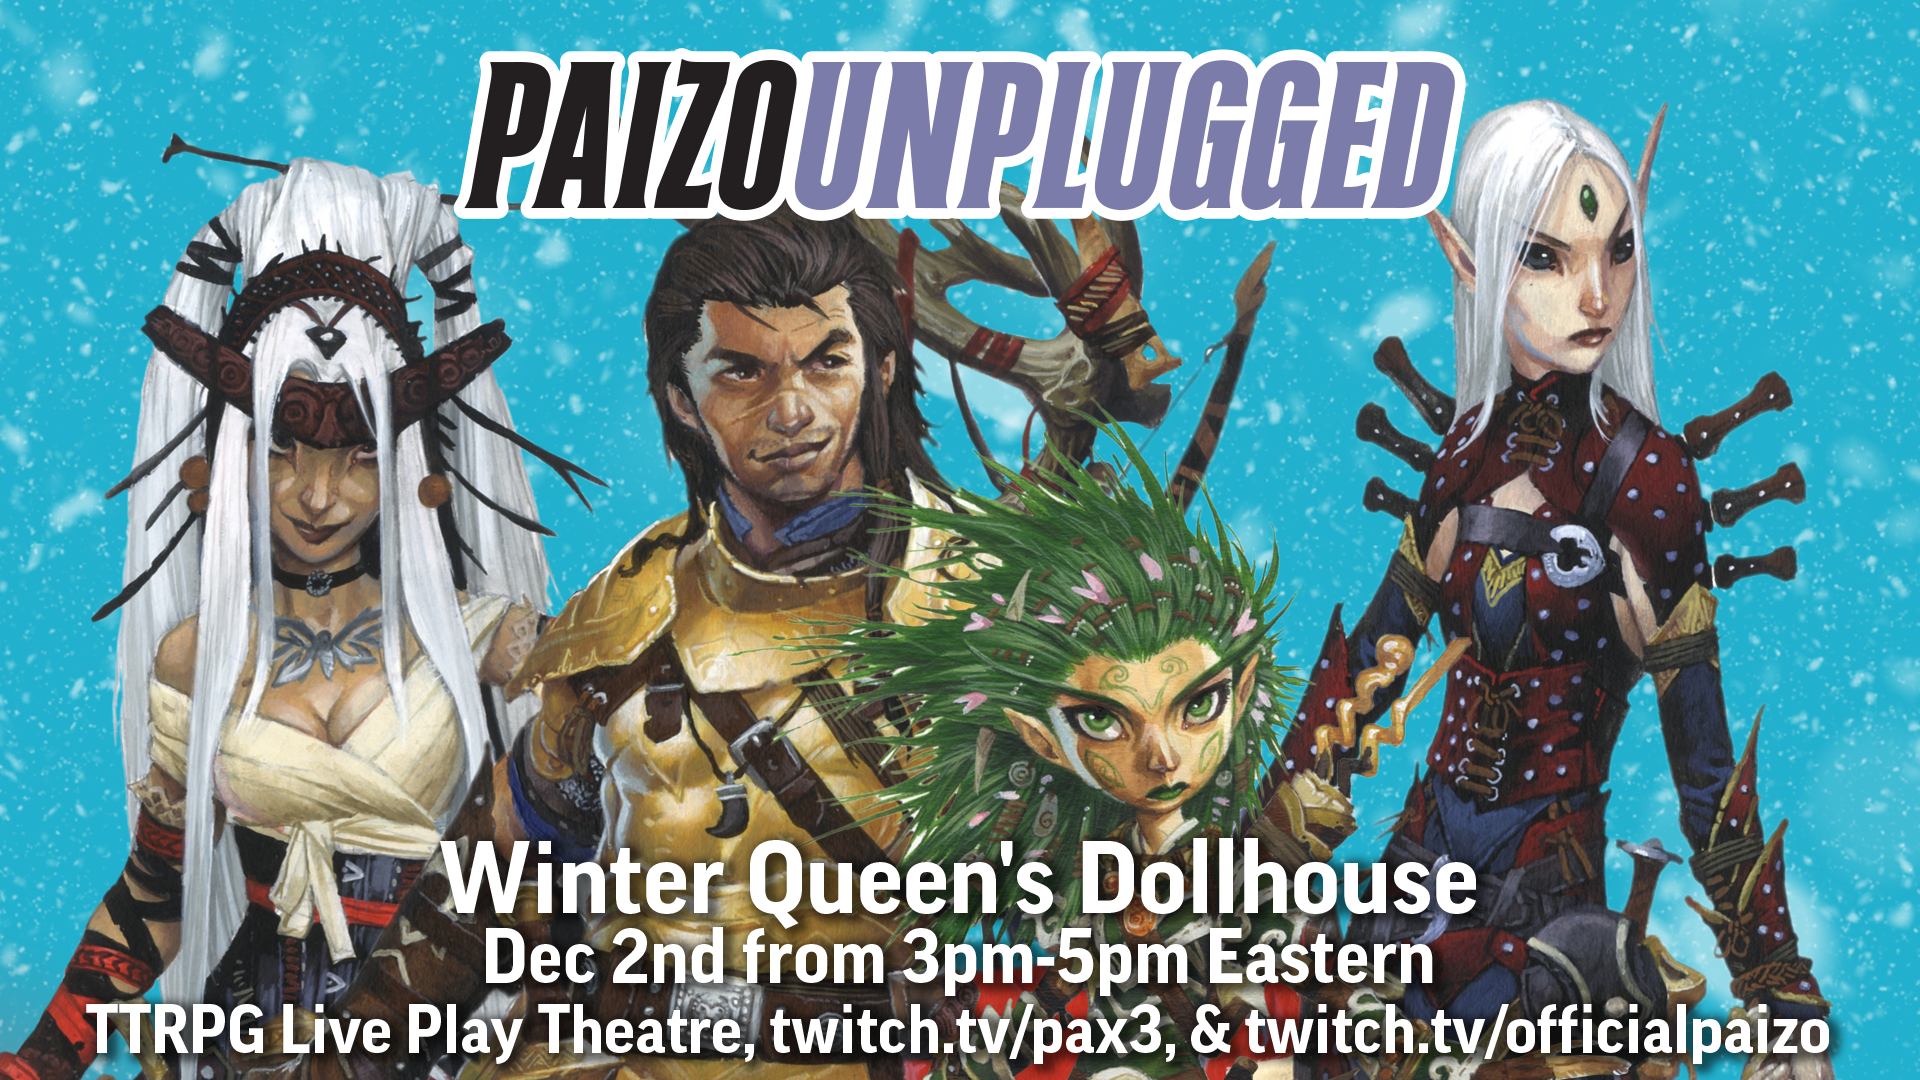 PaizoUnplugged : Winter Queen's Dollhouse, Dec 2nd from 3pm to 5pm Eastern - TTRPG Live Play Theatre, twitch.tv/pax3 and twitch.tv/officialpaizo